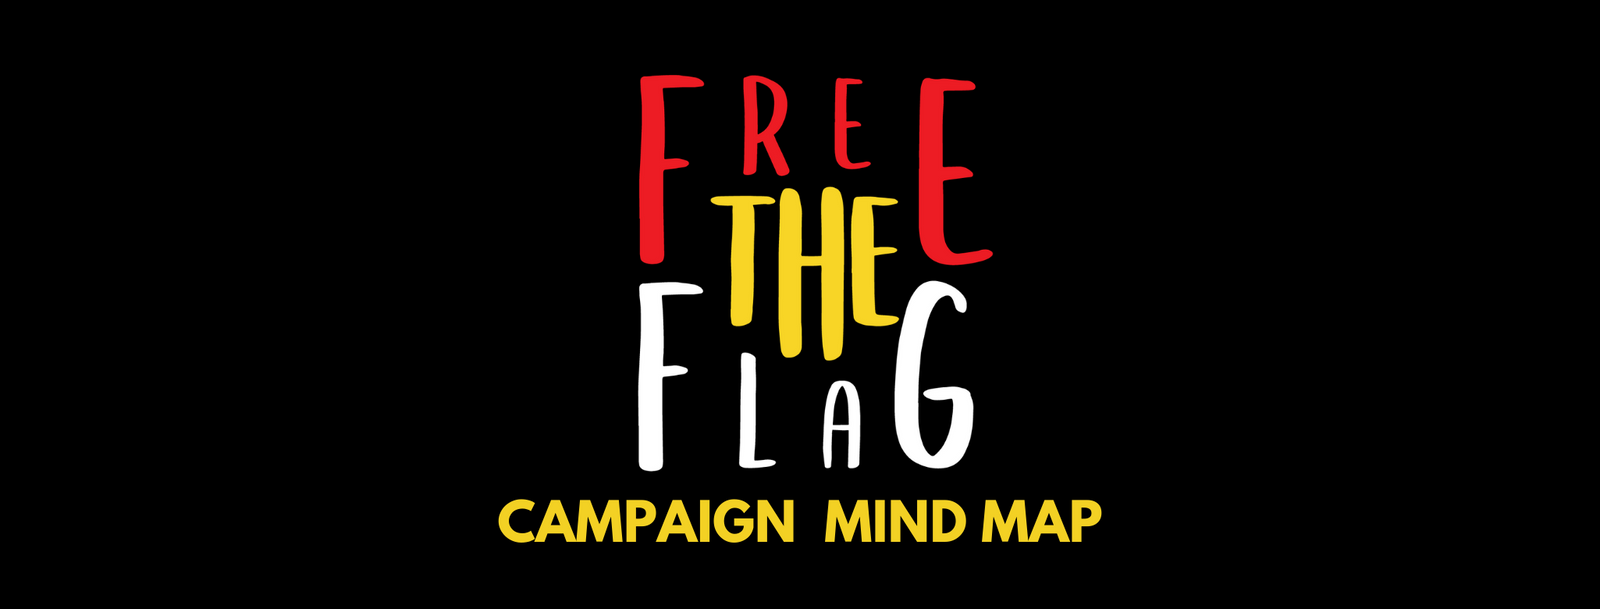 Free The Flag - A campaign mind map